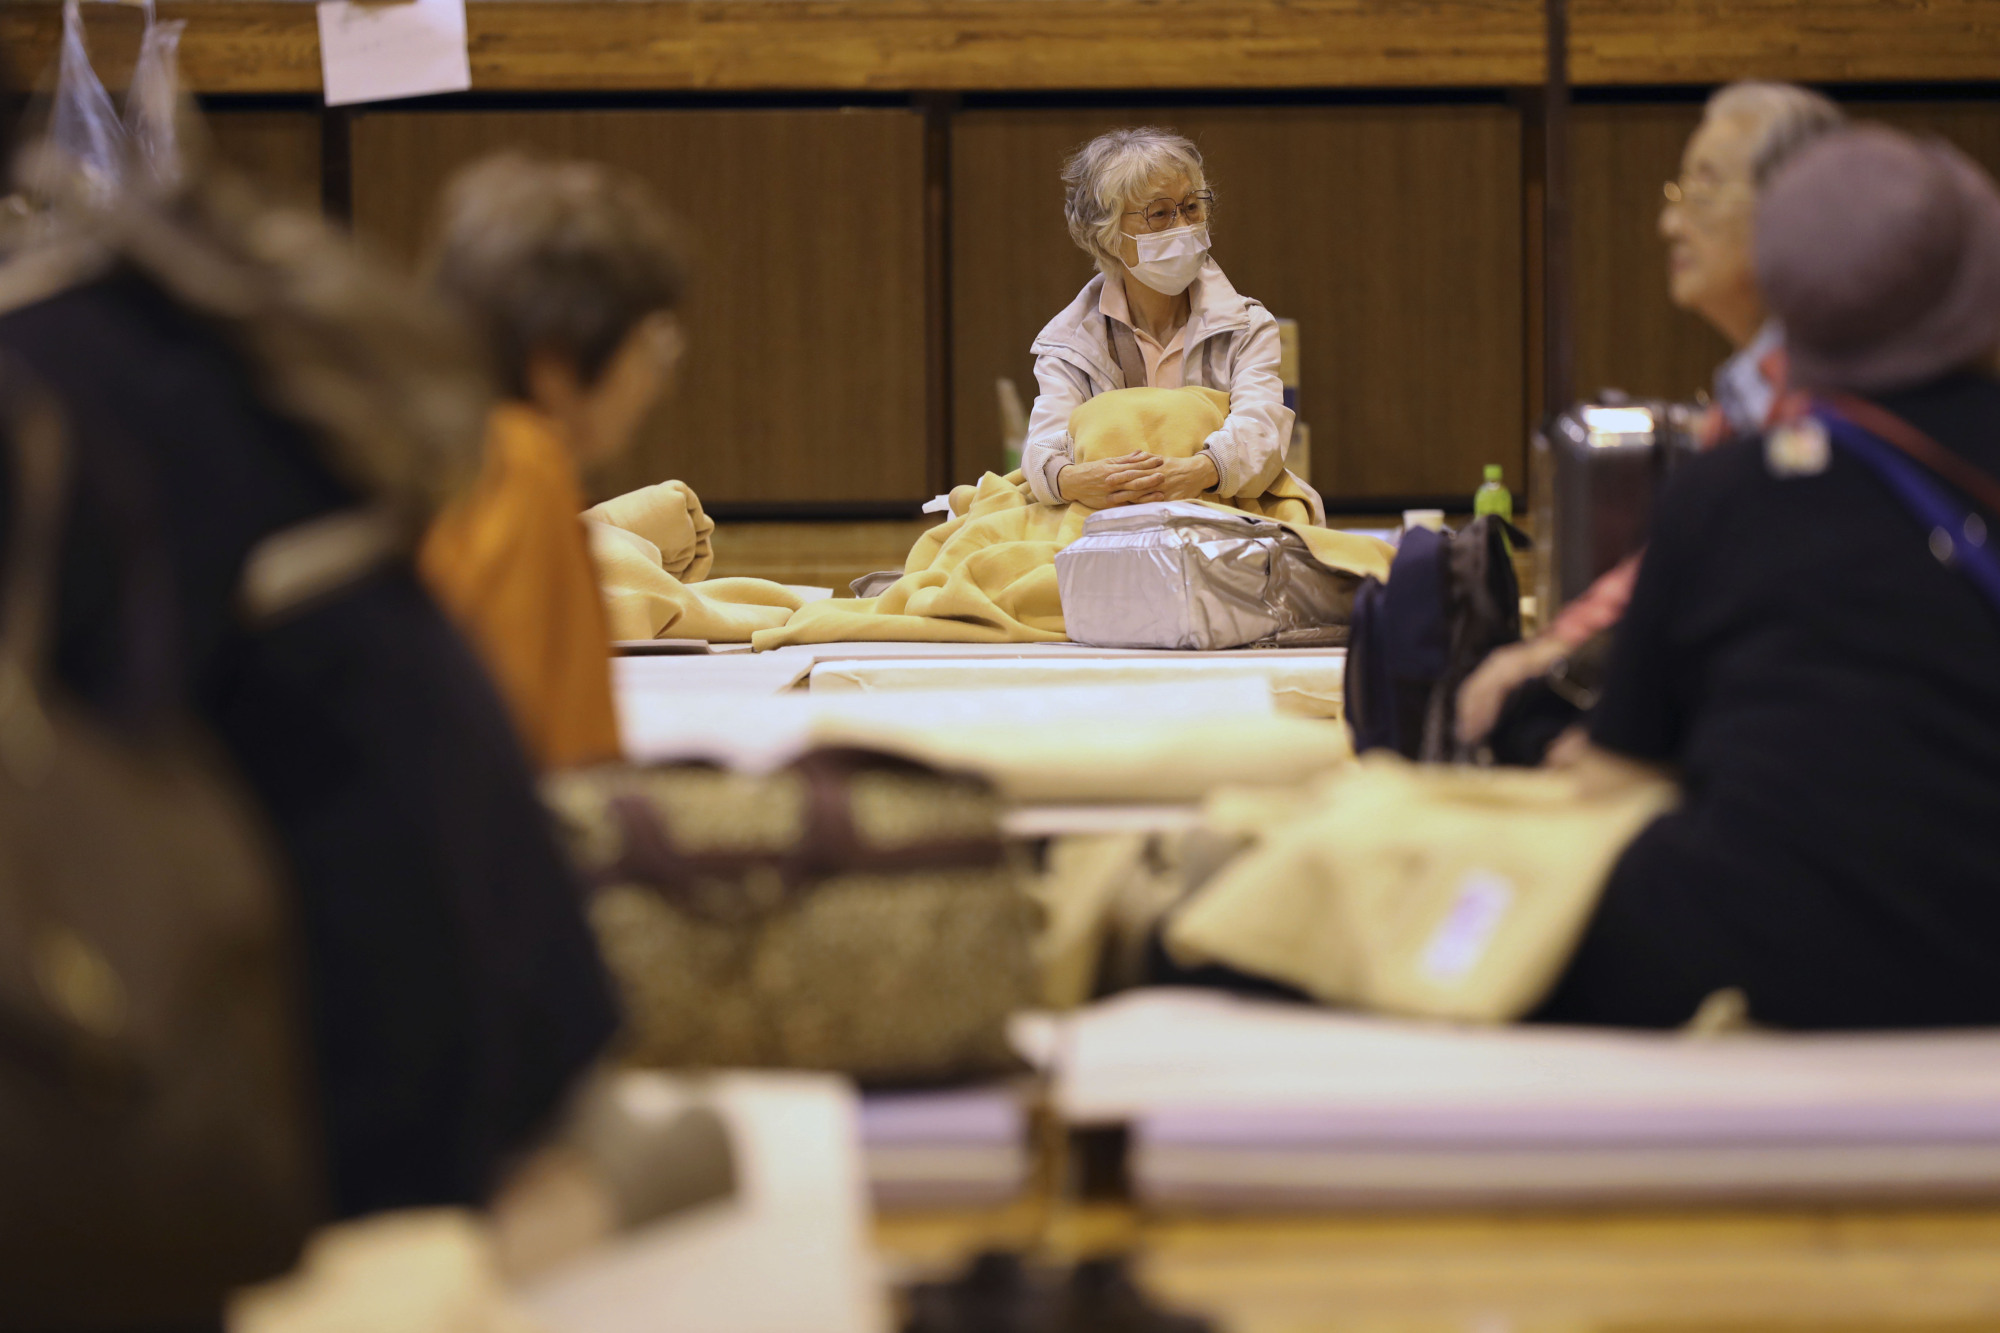 Evacuees from Typhoon Hagibis take shelter at an elementary school gym in Kawagoe, Saitama Prefecture, on Monday. An evacuation center in Taito Ward, Tokyo, turned away two homeless people on Saturday as the storm bore down on the capital. | AP